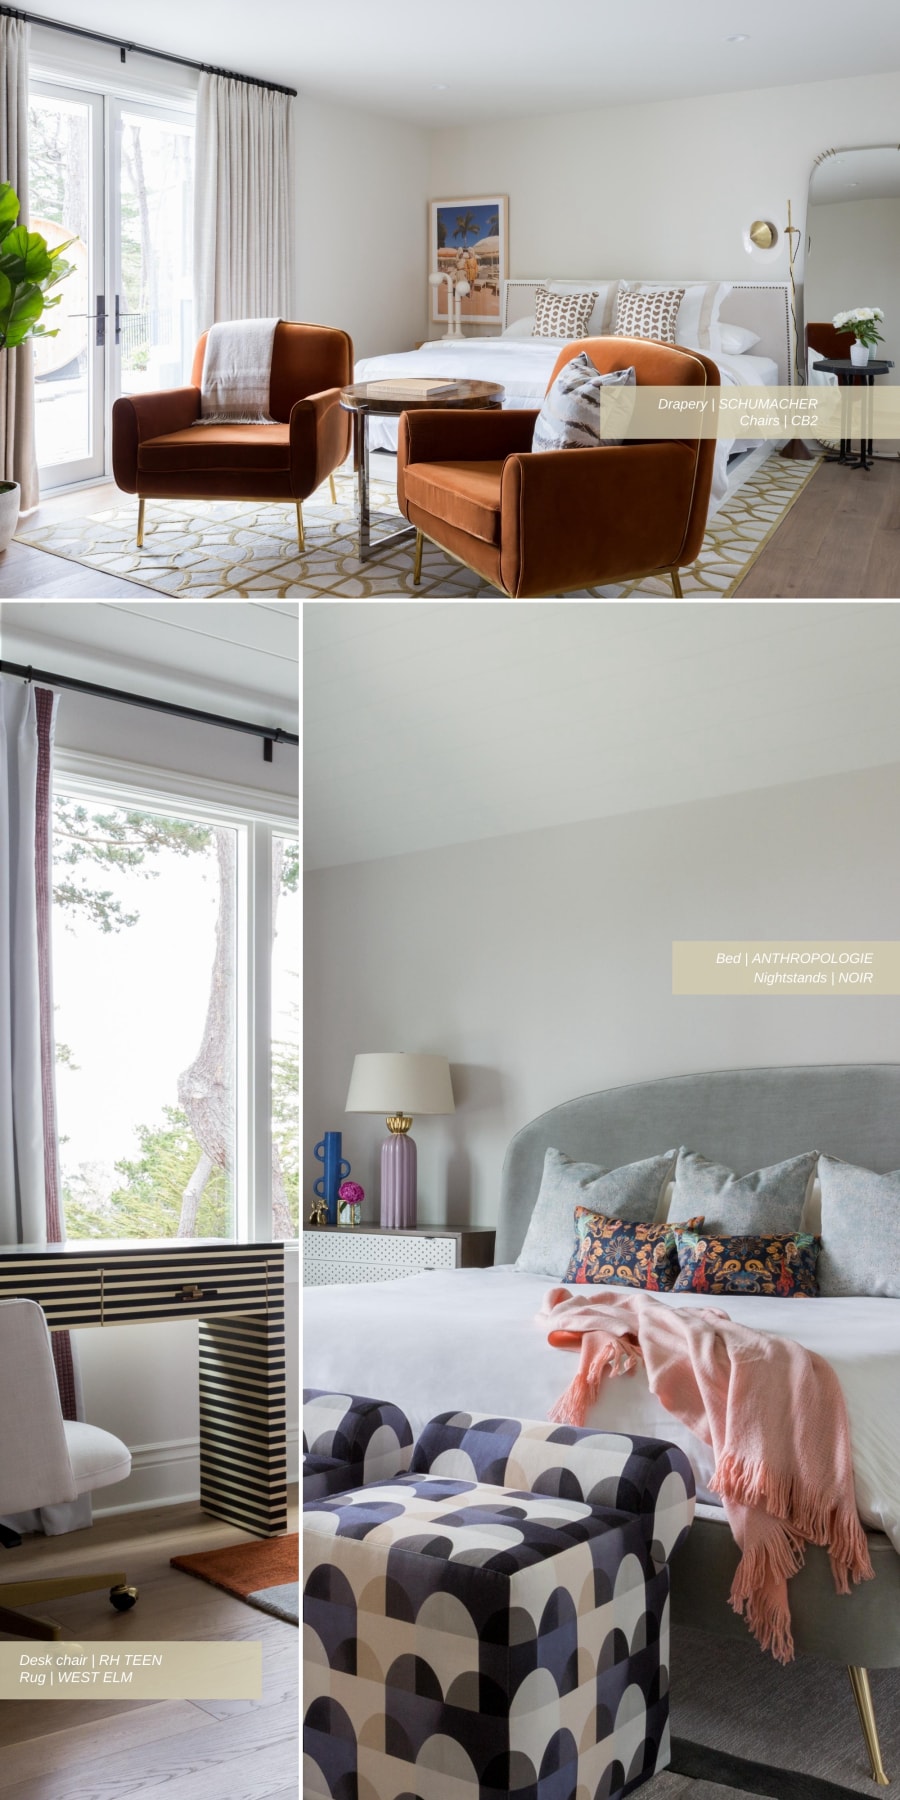 Ochre chairs in a guest room in a Pebble Beach home, designed by Laura U